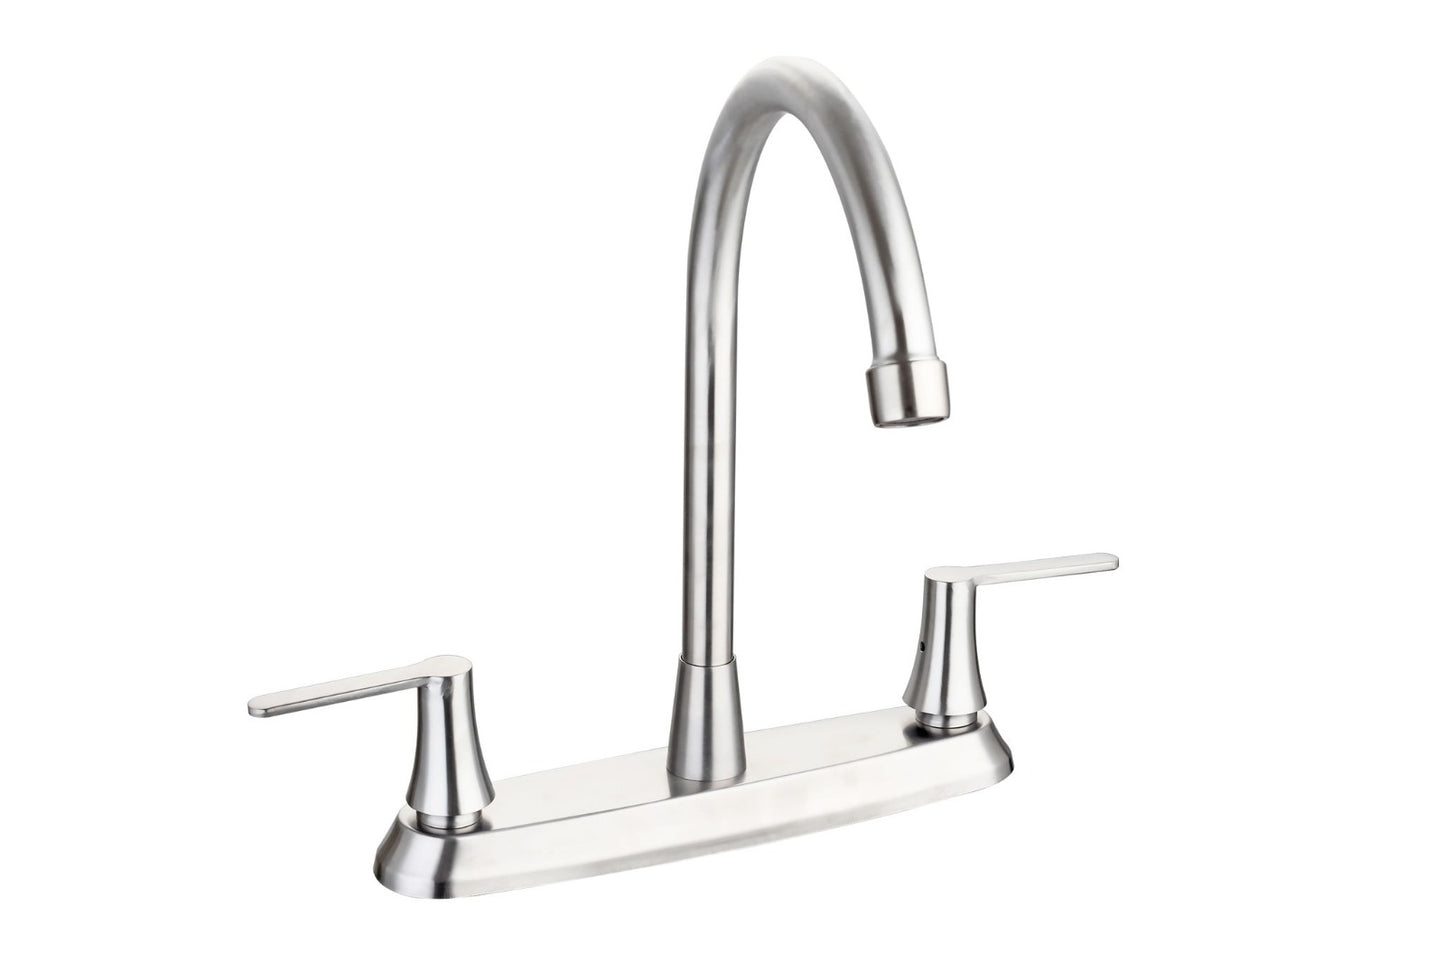 Kitchen faucet stainlees steel finish